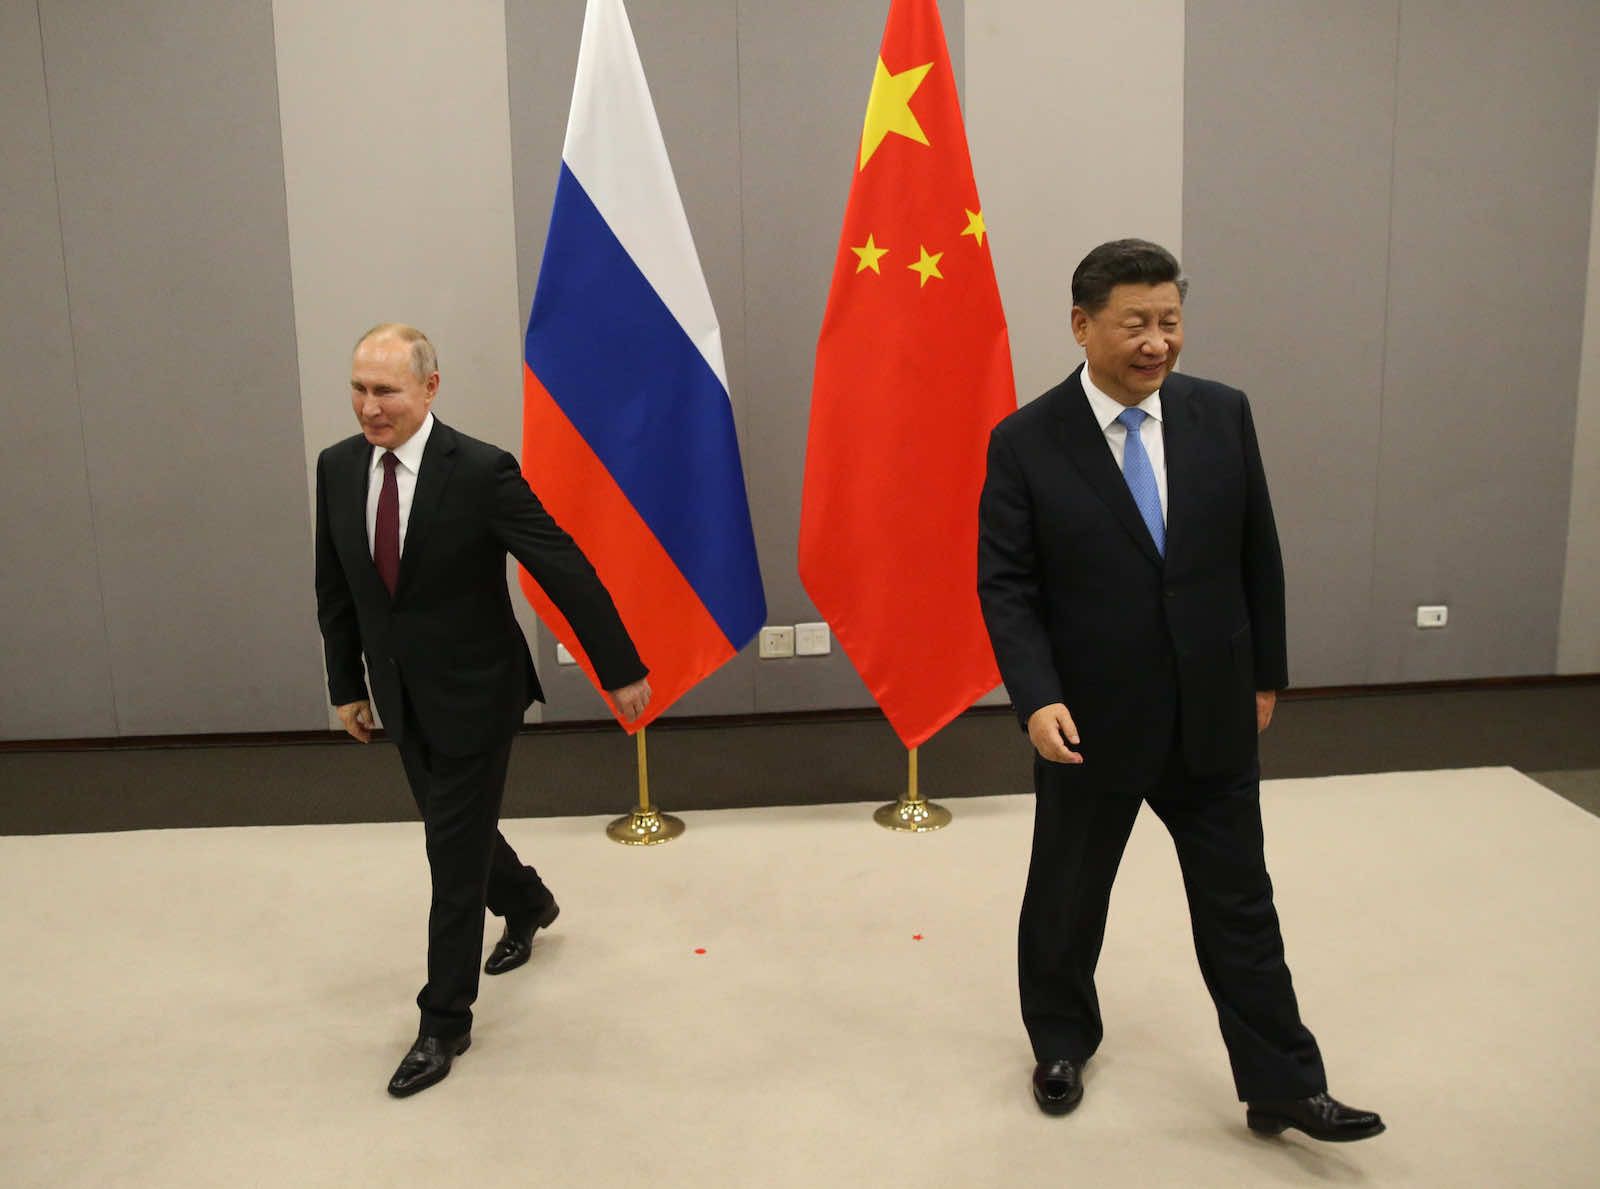 Even after Xi removed the two-term limits to the presidency in 2018, shifting China to a more personalist regime like Putin’s, the CCP as an institution continues to buttresses China (Mikhail Svetlov/Getty Images)